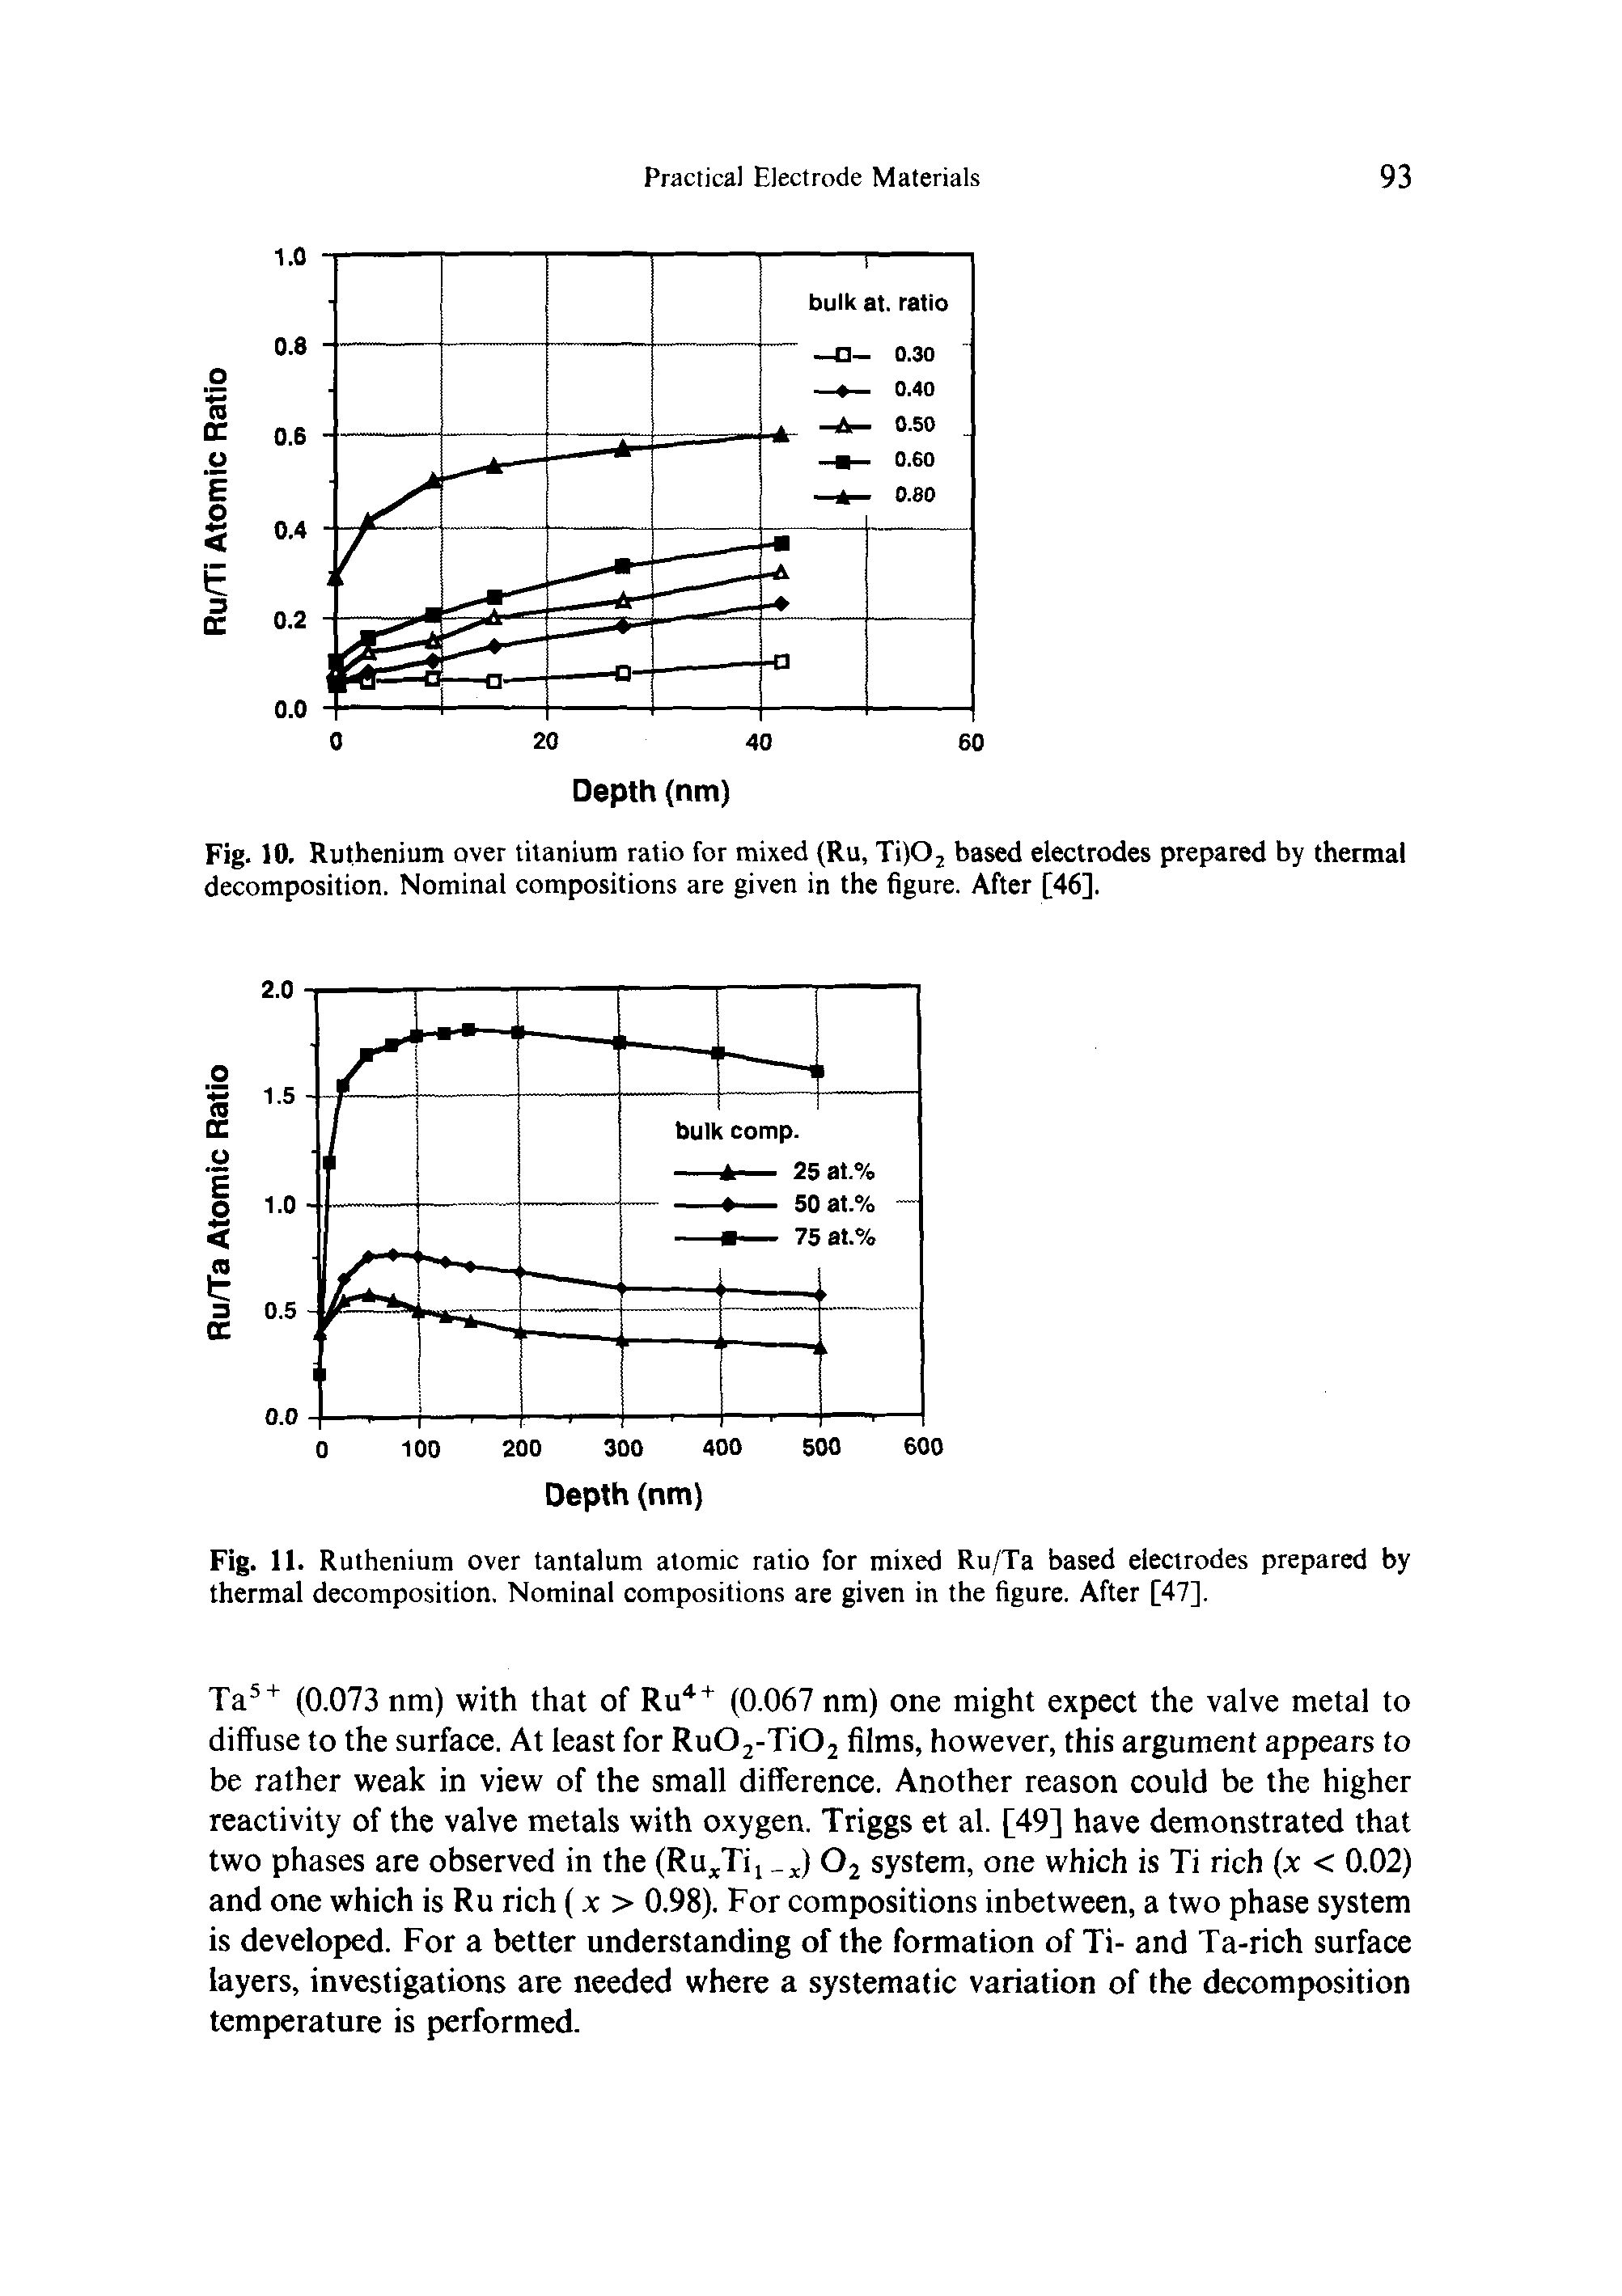 Fig. 11. Ruthenium over tantalum atomic ratio for mixed Ru/Ta based electrodes prepared by thermal decomposition. Nominal compositions are given in the figure. After [47].